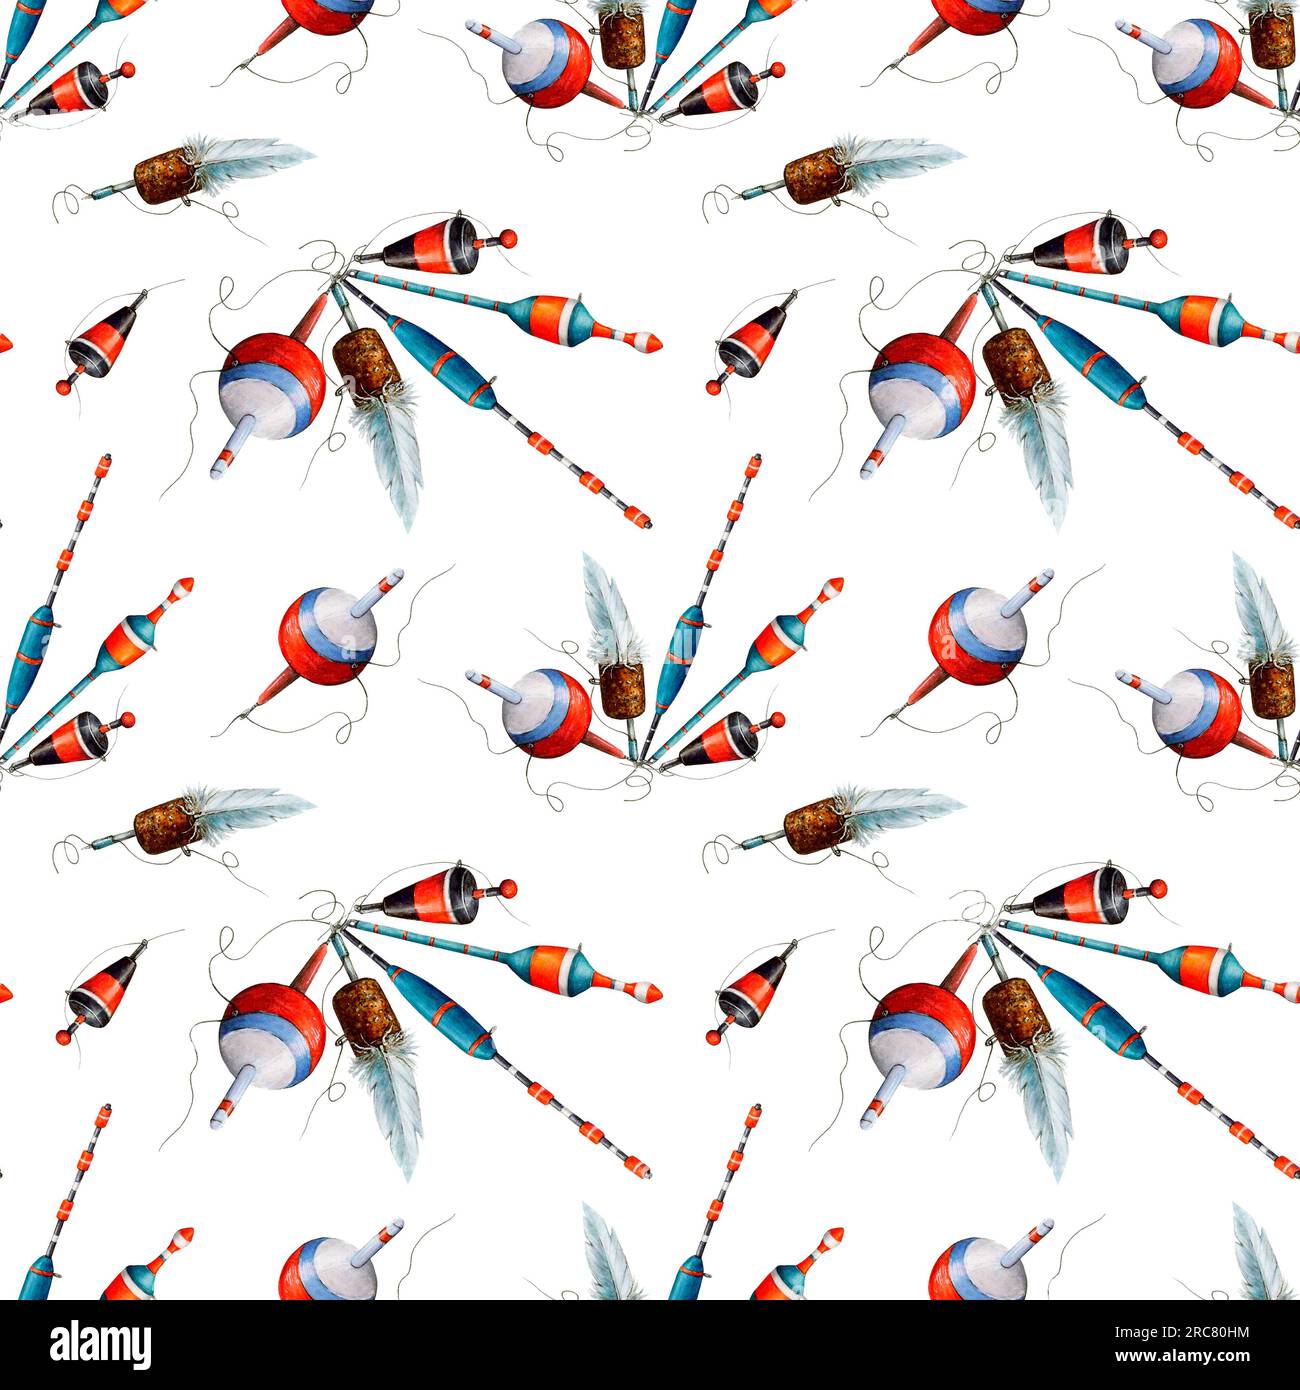 Watercolor drawing pattern from various fishing bobblers, red